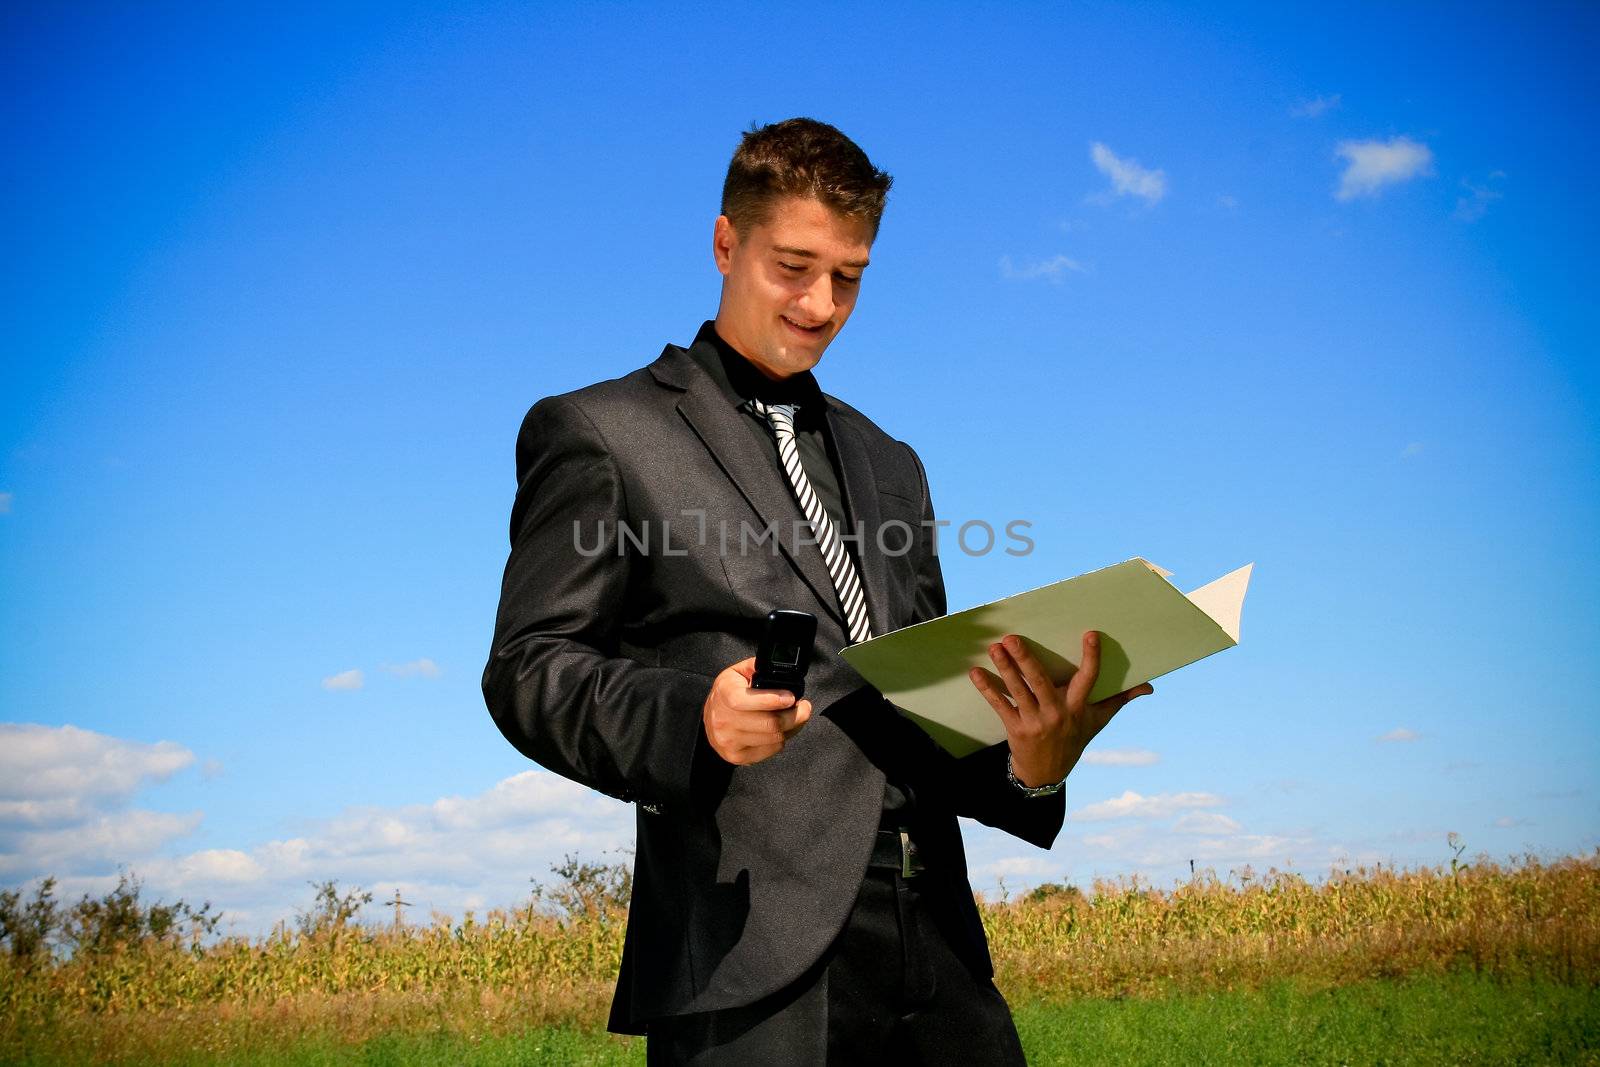 Doing business in the middle of the field